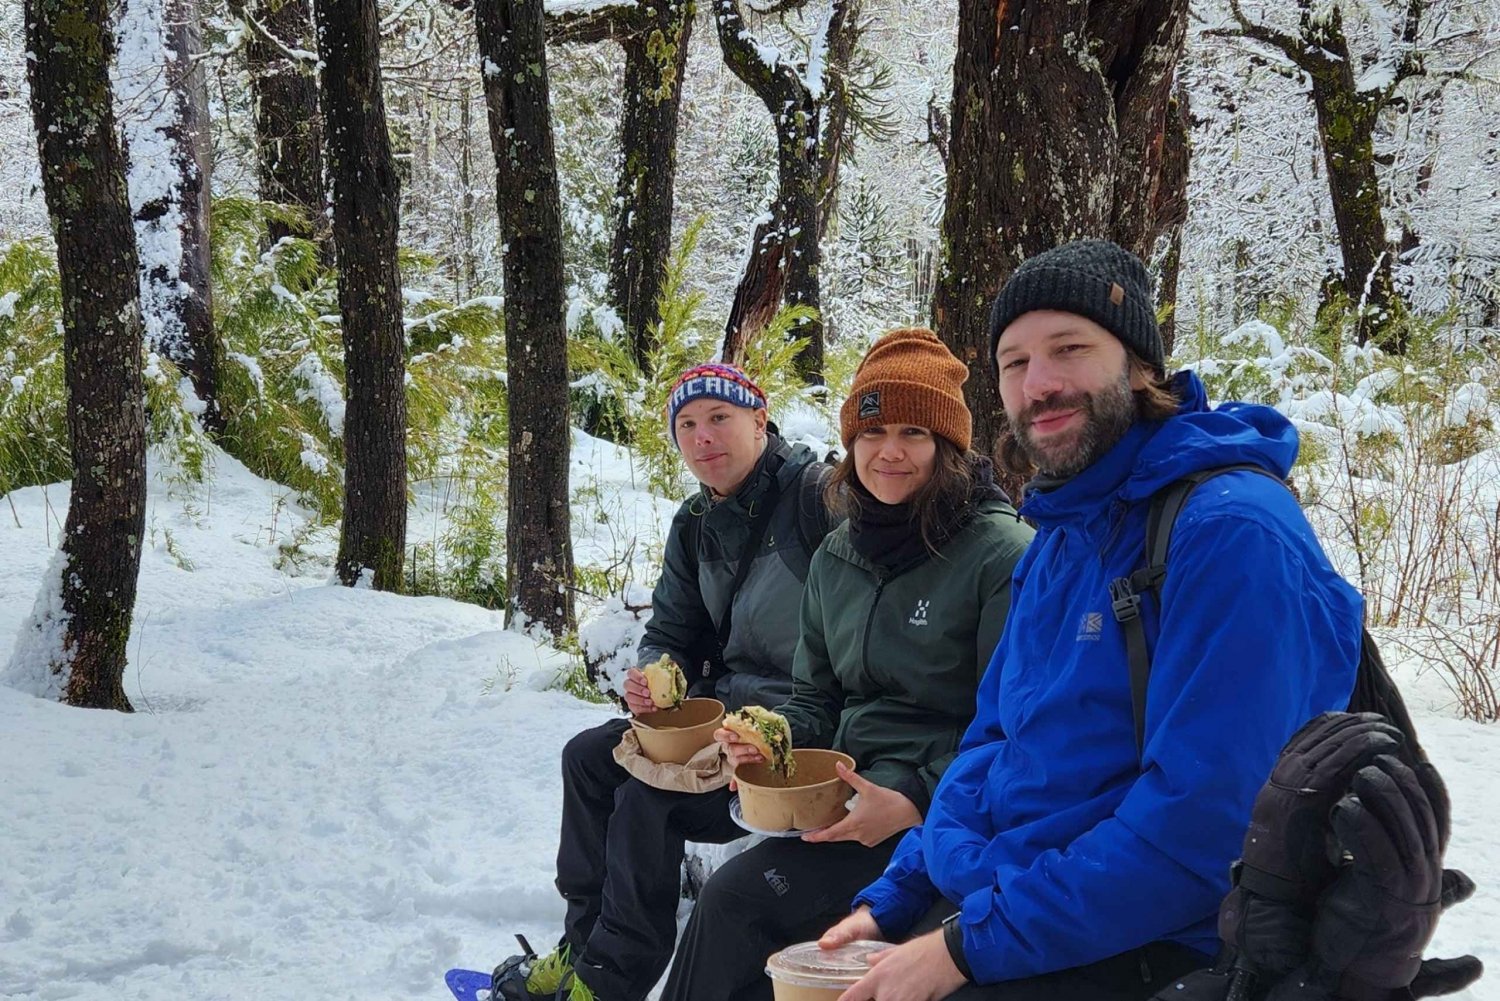 Snowshoeing at the base of Villarrica Volcano & Waterfall